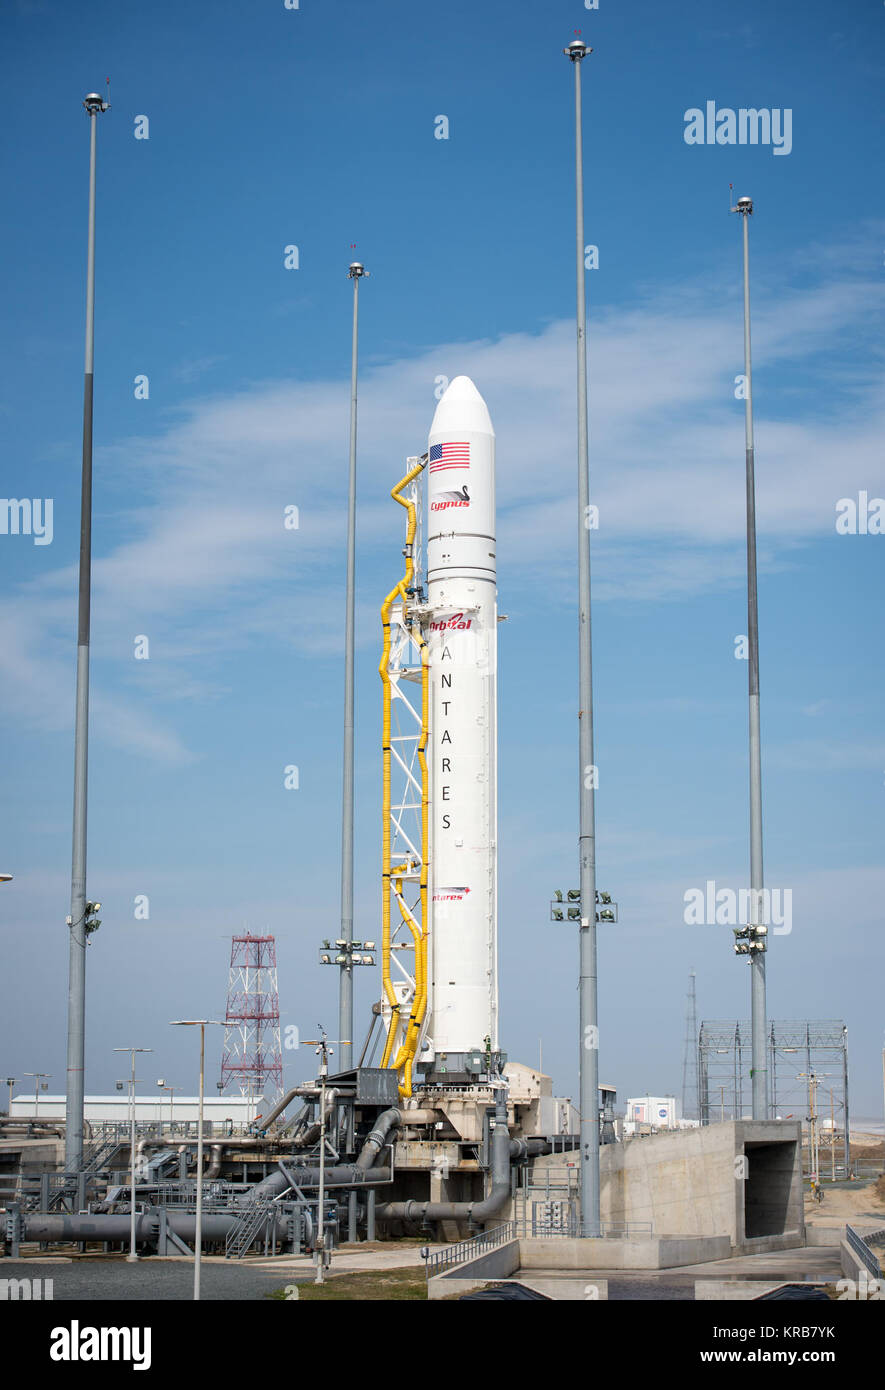 The Orbital Sciences Corporation Antares rocket is seen on the Mid-Atlantic Regional Spaceport (MARS) Pad-0A at the NASA Wallops Flight Facility, Friday, April 19, 2013 in Virginia.  NASA's commercial space partner, Orbital Sciences Corporation, is scheduled to test launch its first Antares on Saturday, April 20, 2013.  Photo Credit: (NASA/Bill Ingalls) Antares A-ONE vertical - April 20.1 Stock Photo